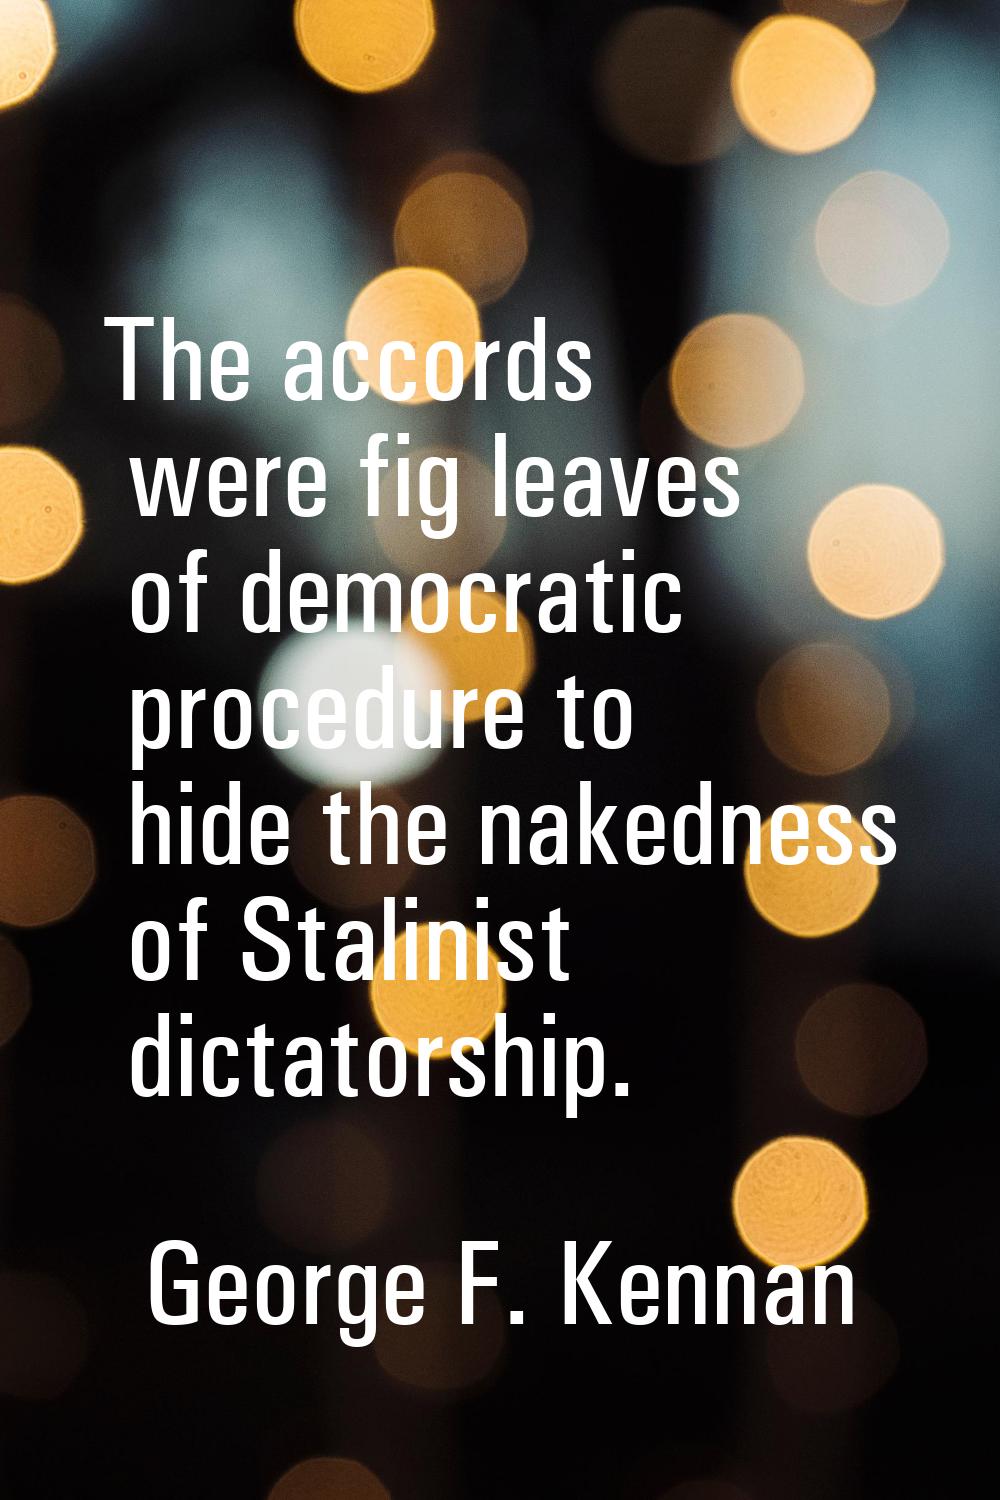 The accords were fig leaves of democratic procedure to hide the nakedness of Stalinist dictatorship